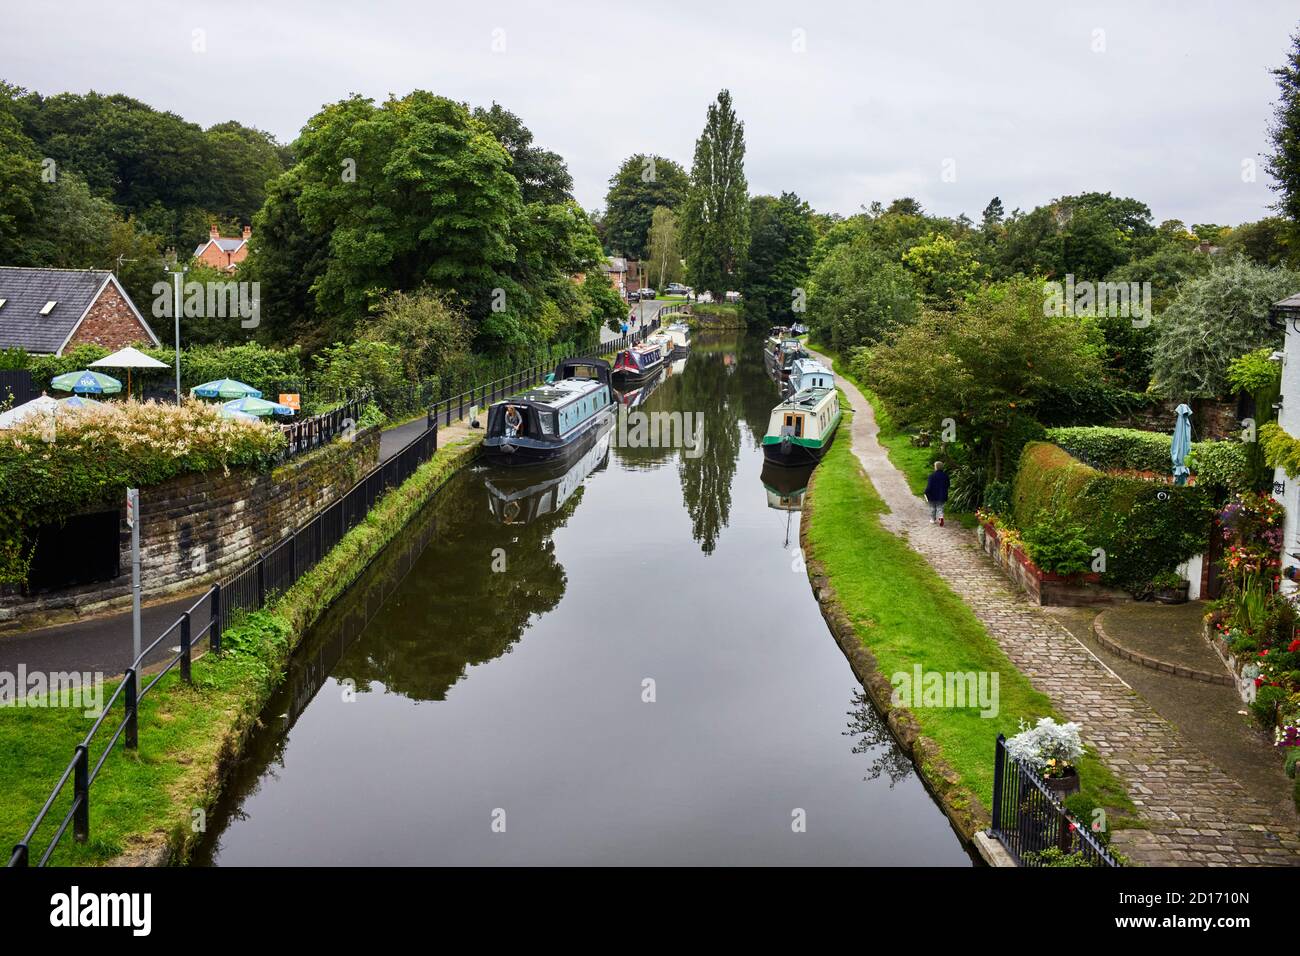 Looking down on the Bridgewater canal at Lymm village with moorings on both sides of the canal Stock Photo